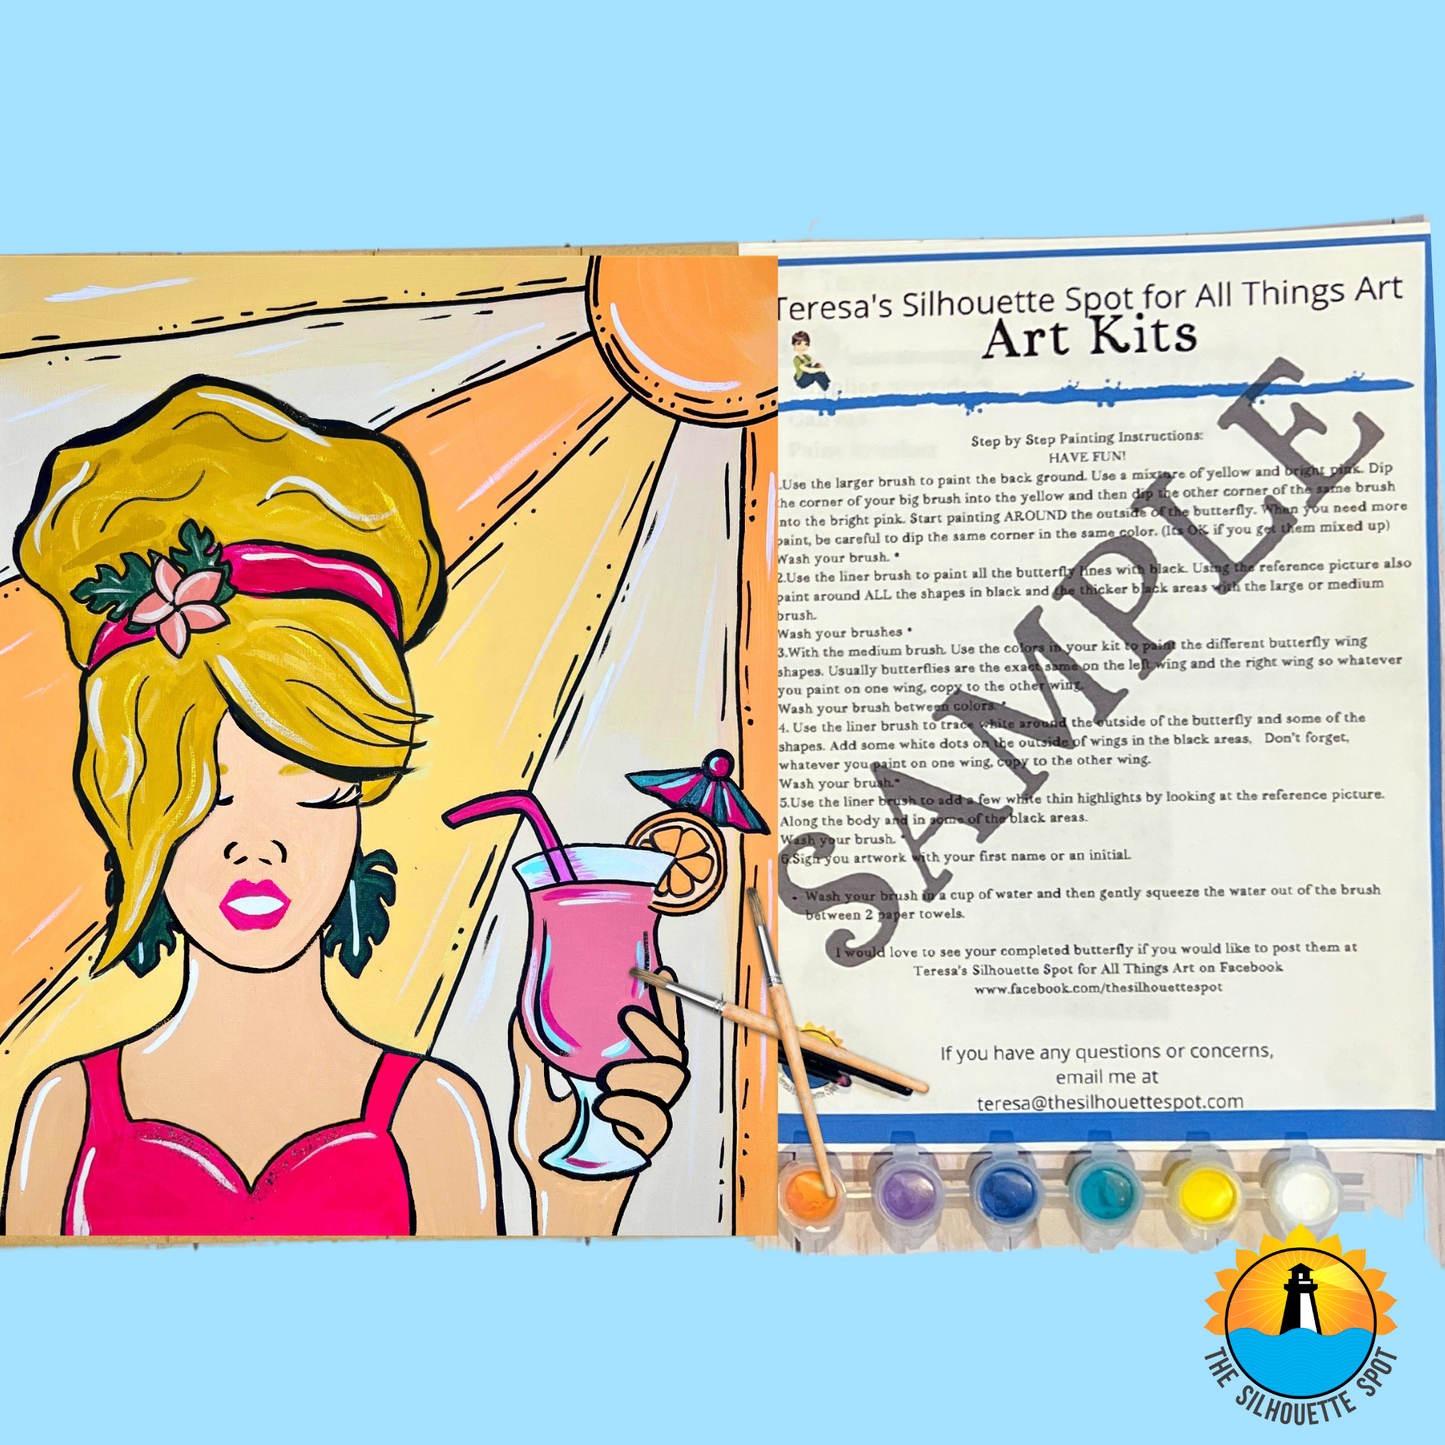 Canvas Complete Art Kit! Virtual at home Woman Power DIY Art! Great For Beginners!